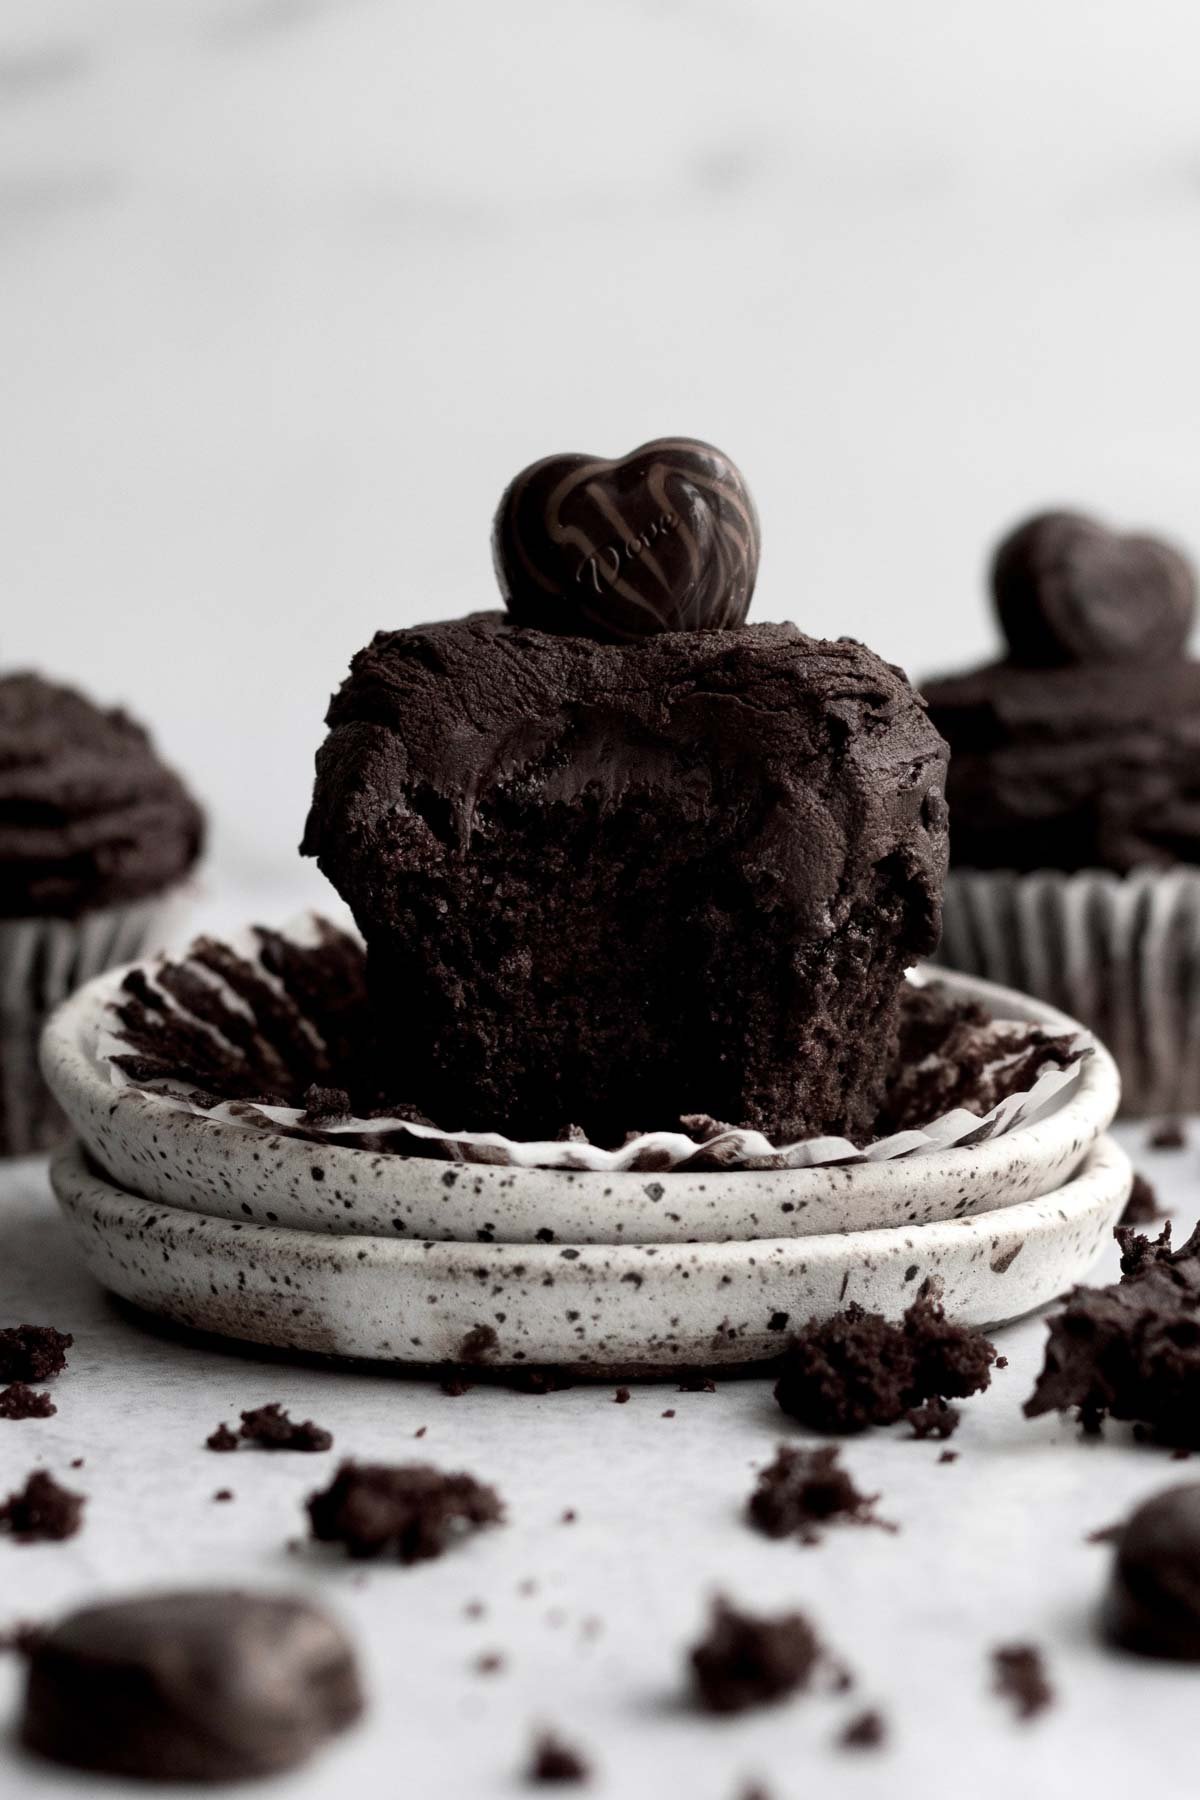 An Eggless Chocolate Cupcake with a bite taken out.